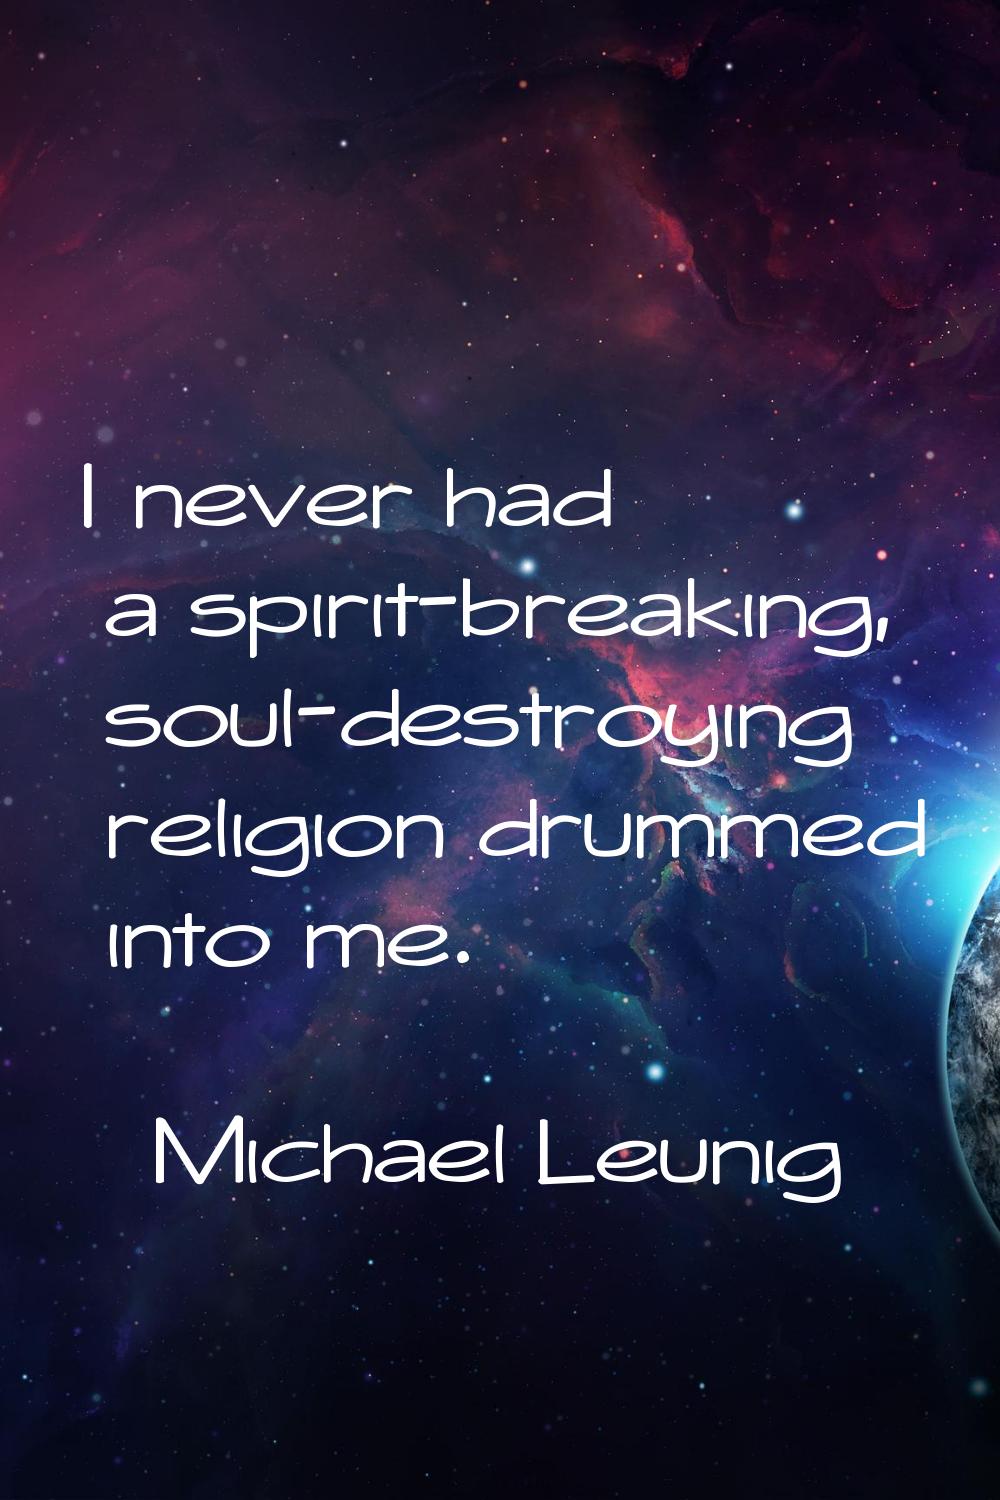 I never had a spirit-breaking, soul-destroying religion drummed into me.